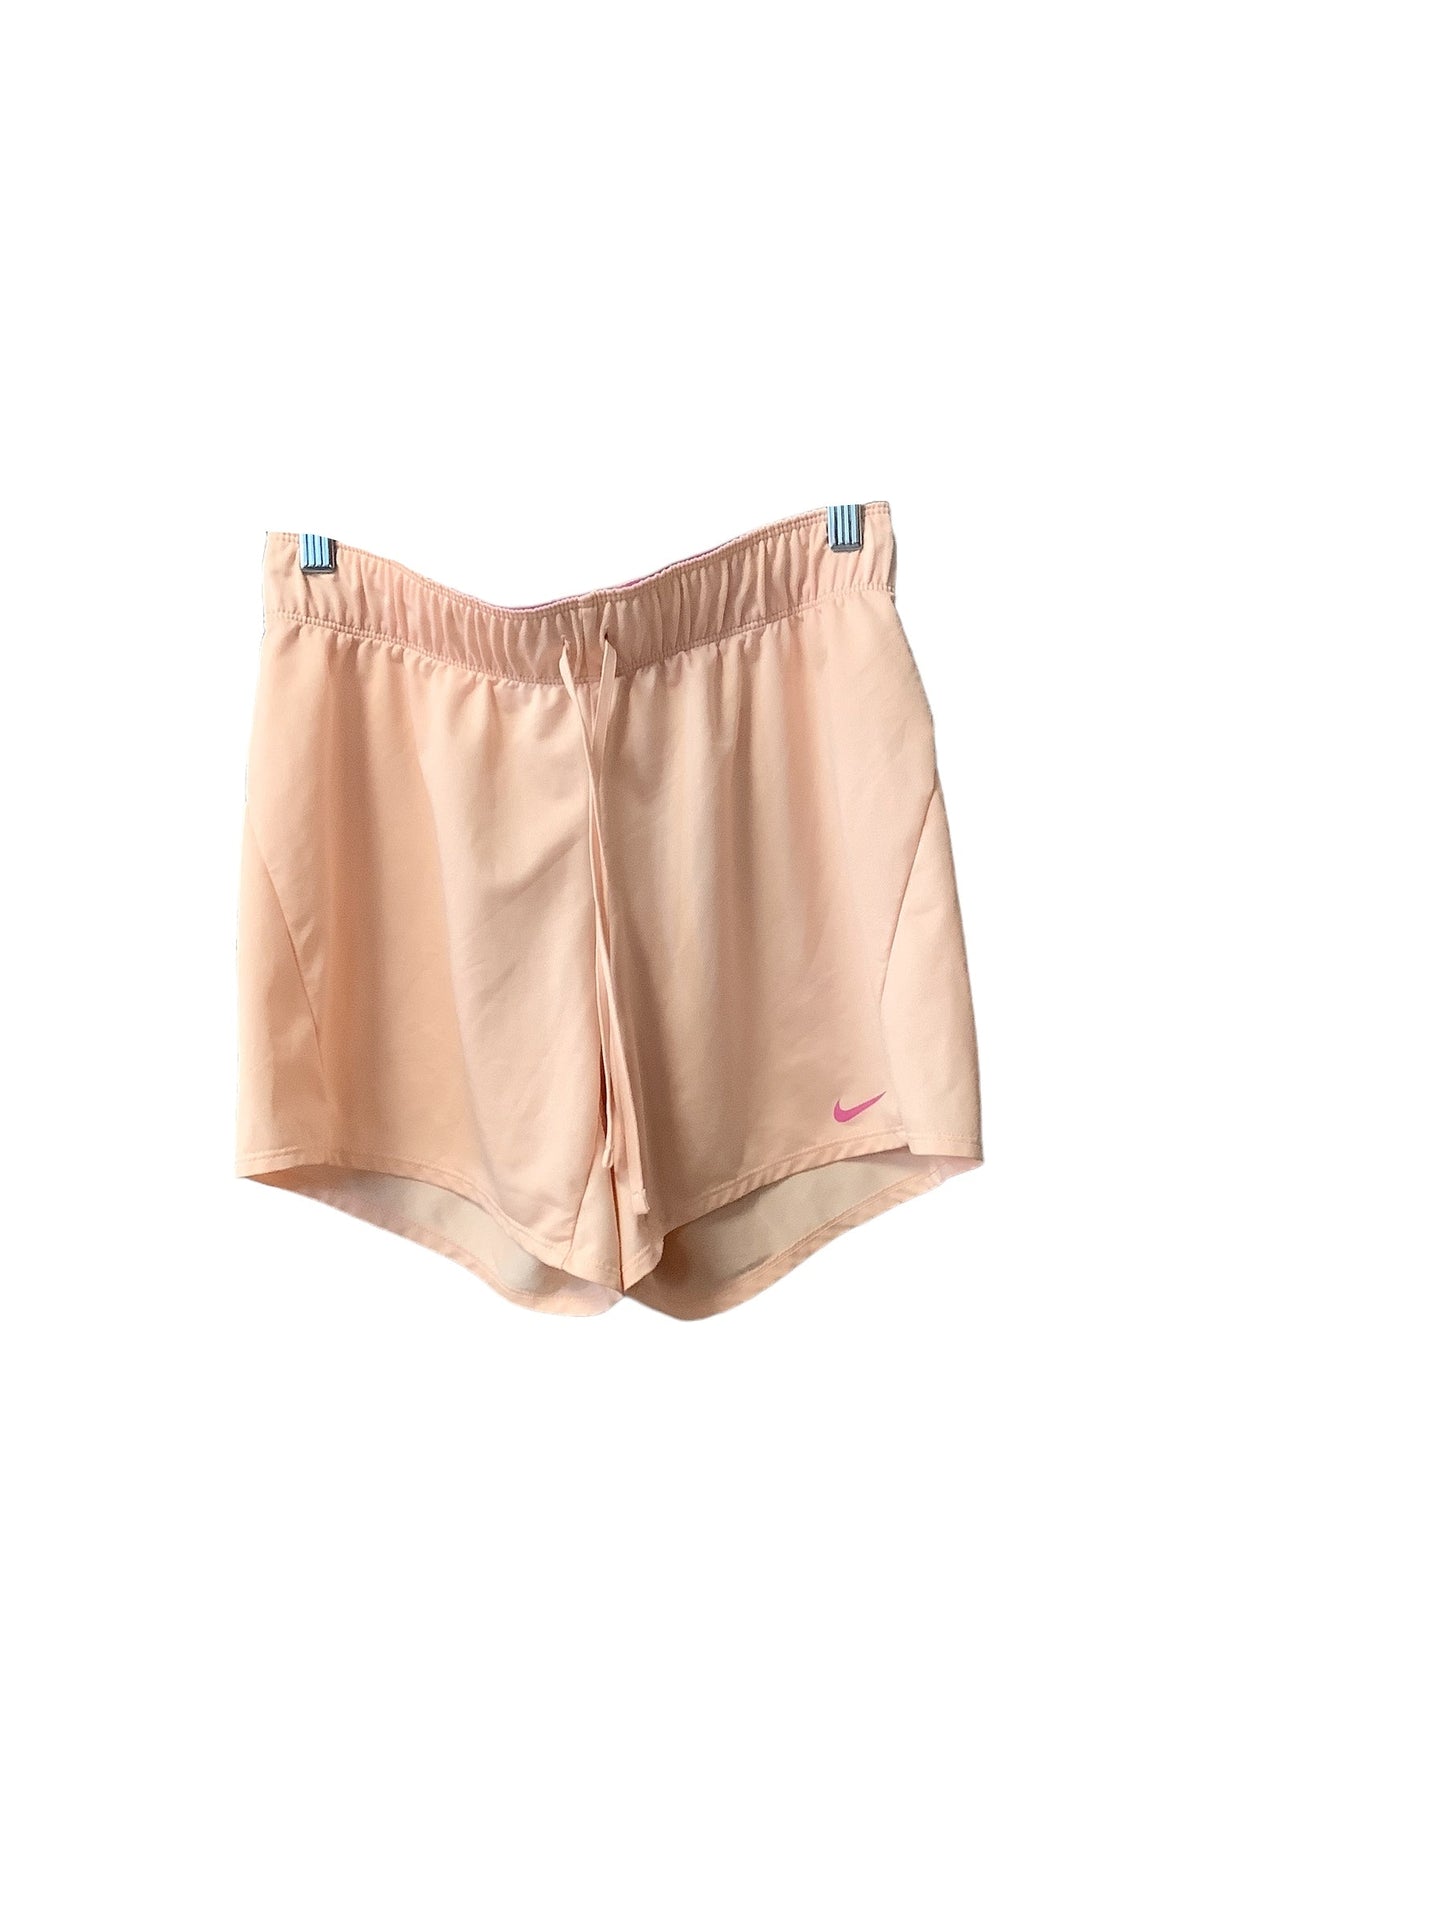 Peach Athletic Shorts Nike Apparel, Size S